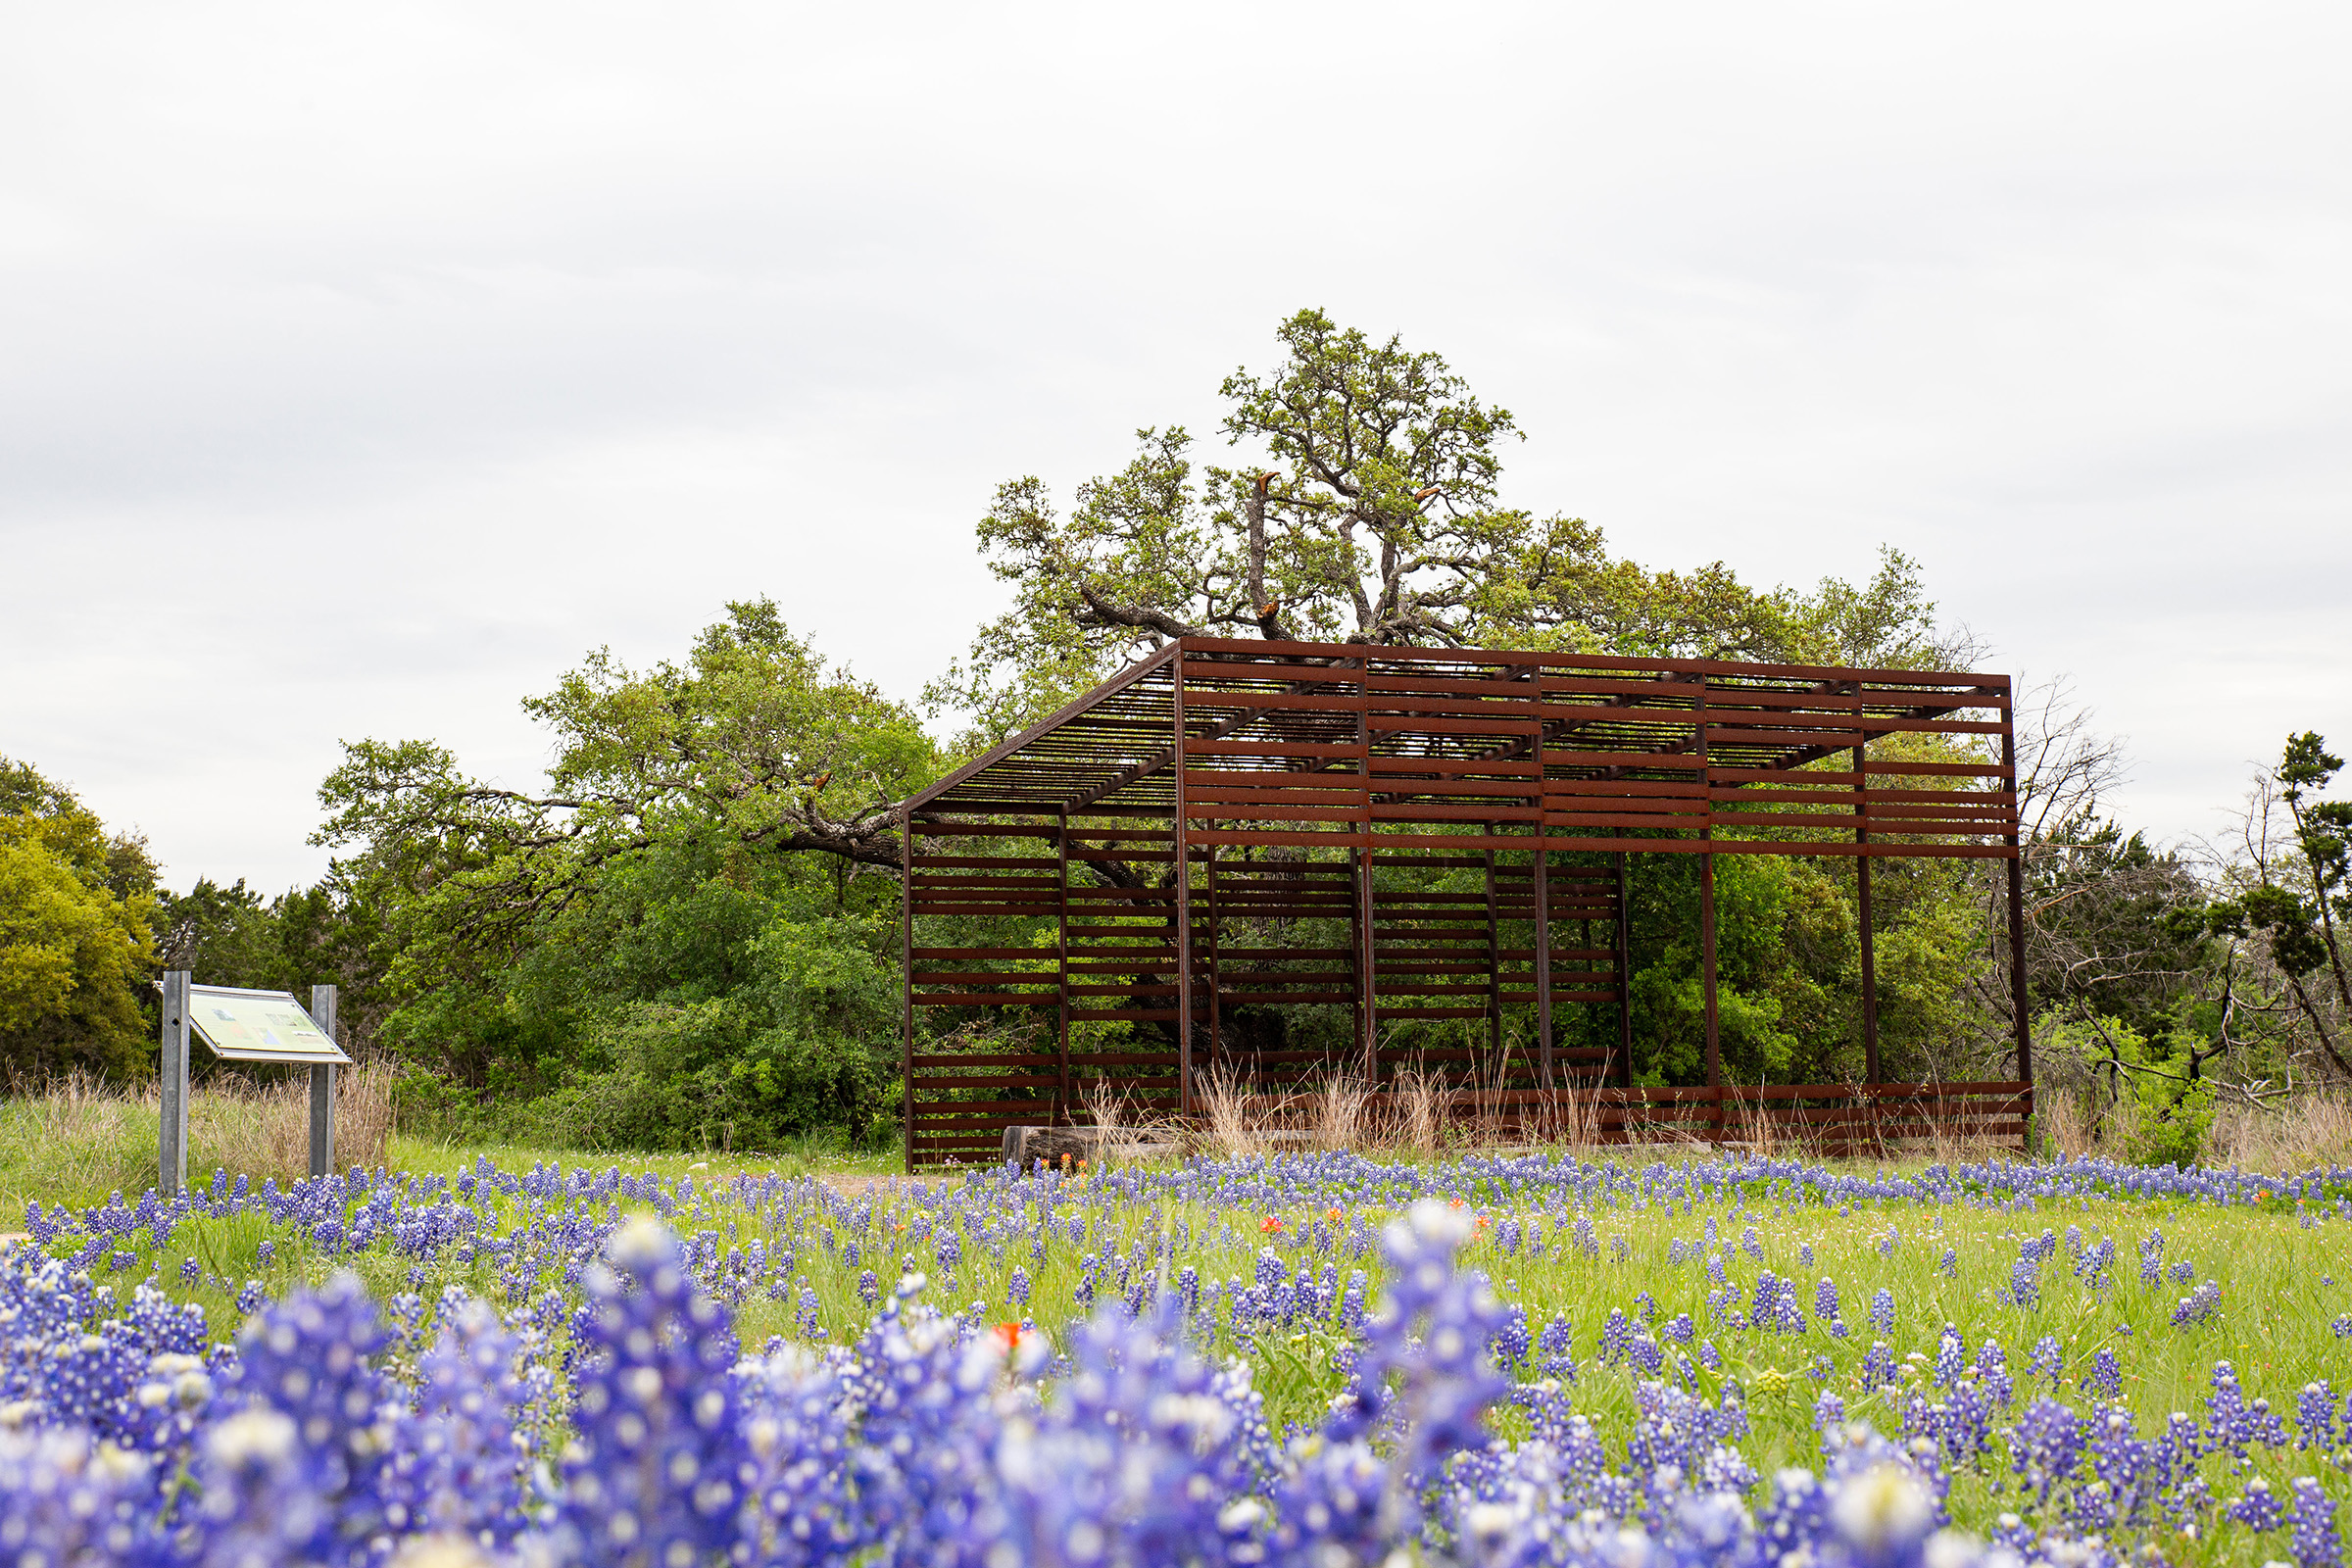 Patio structure in a field of bluebonnets